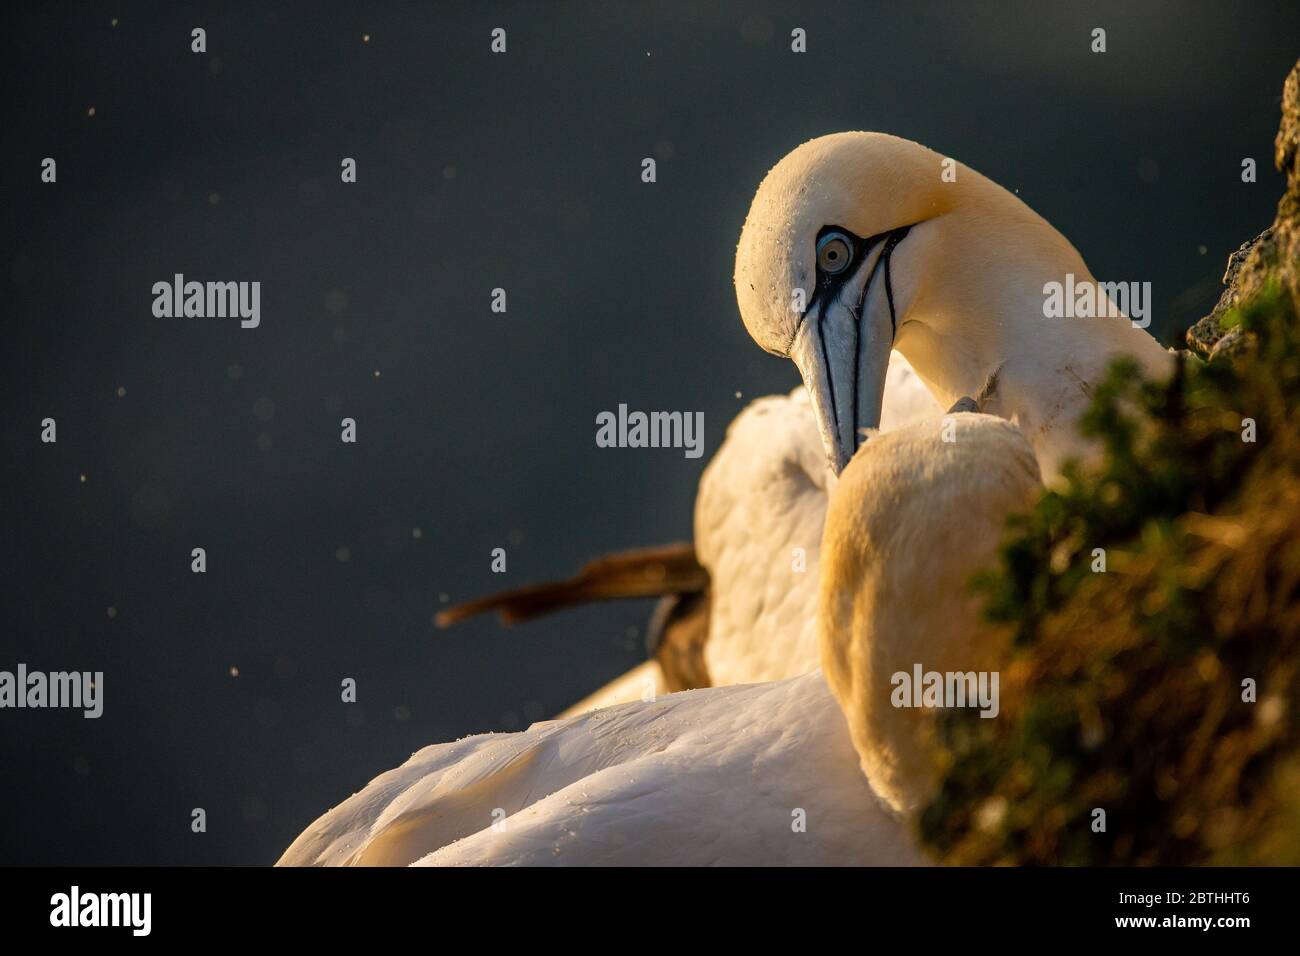 A Gannet nests on Bempton Cliffs on July 9, 2019 near Bridlington, England. Thousands of seabirds, including gannets, migrate in from warmer climates to nest on the chalk cliffs at Bempton in North Yorkshire, where they will spend the summer breeding and rearing their young. Over 20,000 Gannets - that pair for life and can live for over 20 years - make up the quarter of a million seabirds that return to nest each summer on these 100 meter high chalk cliffs. The Gannets that nest on the Bempton Cliffs RSPB reserve make up what is the biggest breeding colony on the UK mainland. Stock Photo